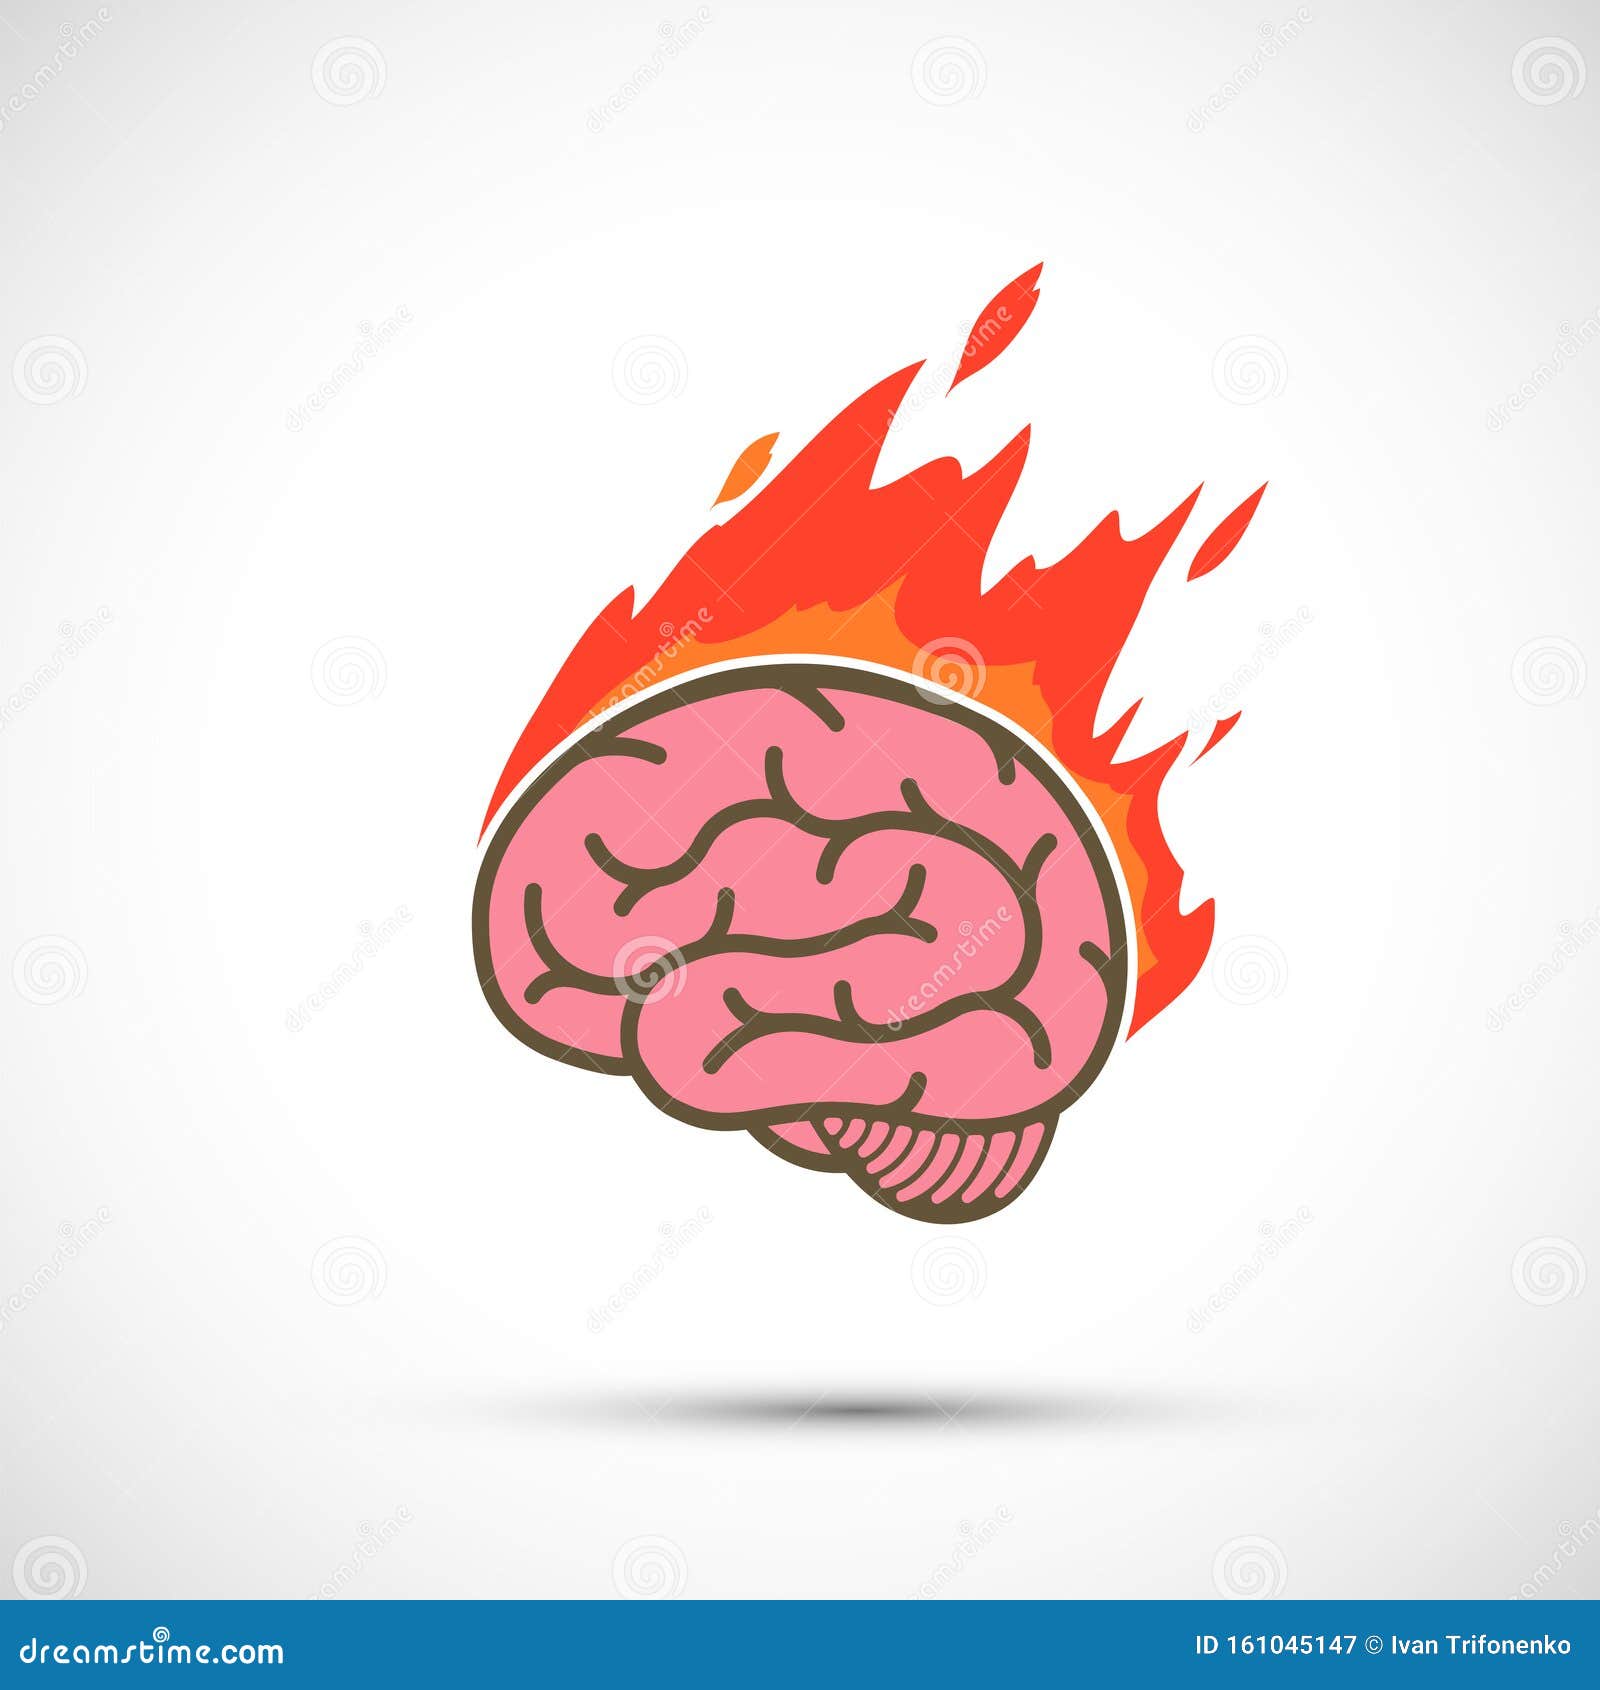 icon human brain burns in flame. migraine or stress